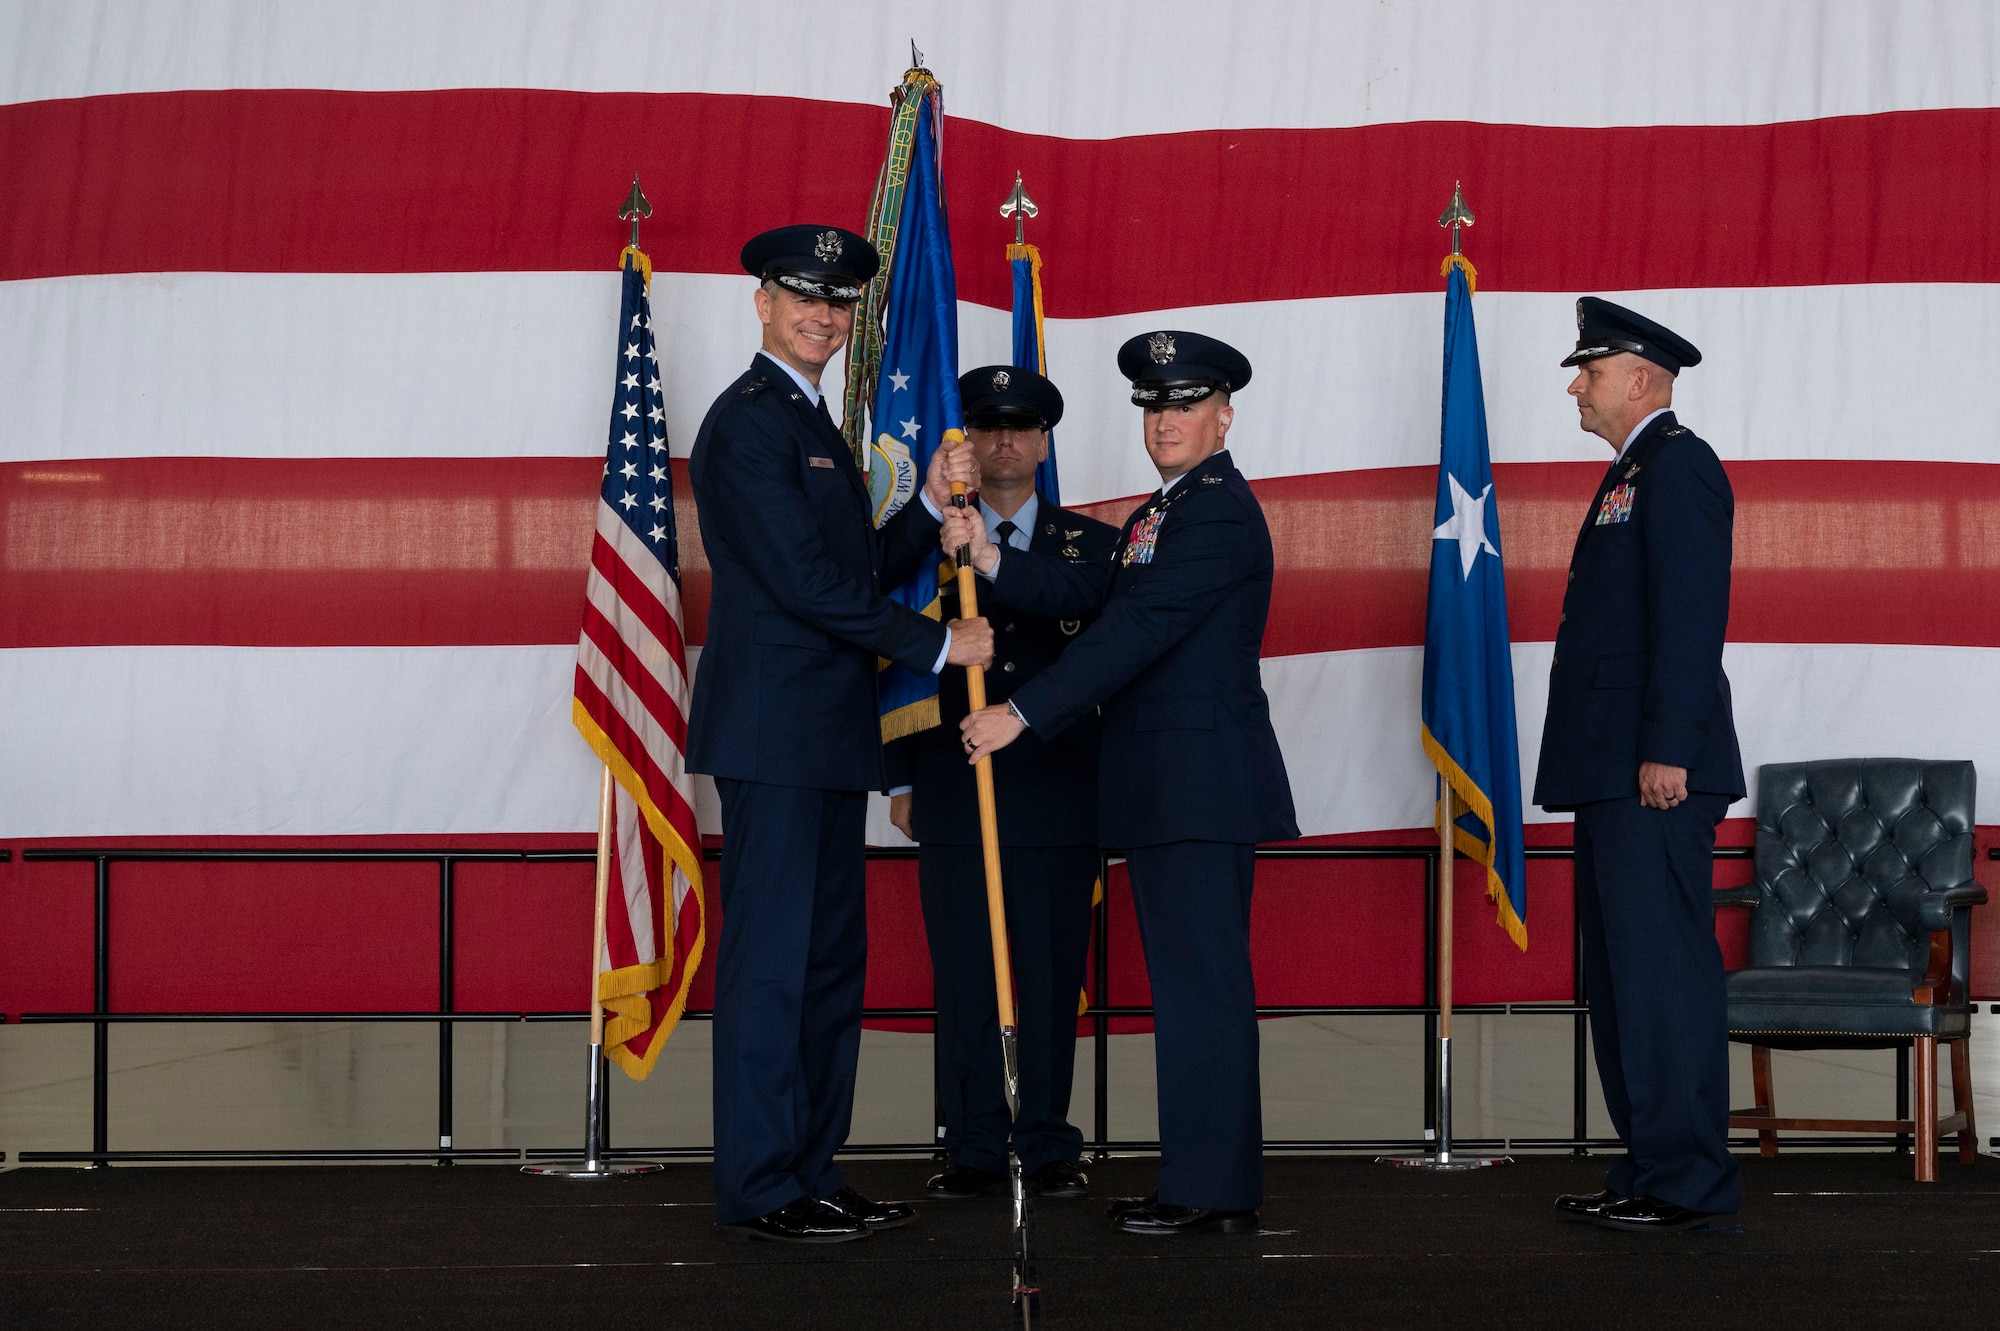 U.S, Air Force Col. Craig Prather, former 47th Flying Training Wing commander, turns over the 47th Flying Training Wing guidon to Maj. Gen. Craig Wills, 19th Air Force commander, during the 47th Flying Training Wing change of command ceremony at Laughlin Air Force Base, Texas, July 22, 2022. As commander, Davidson will oversee nearly 2,800 military and civilian personnel engaged in executing more than 61,000 aircraft sorties yearly in support of Laughlin's Specialized Undergraduate Pilot Training mission. (U.S. Air Force photo by Airman 1st Class Kailee Reynolds)